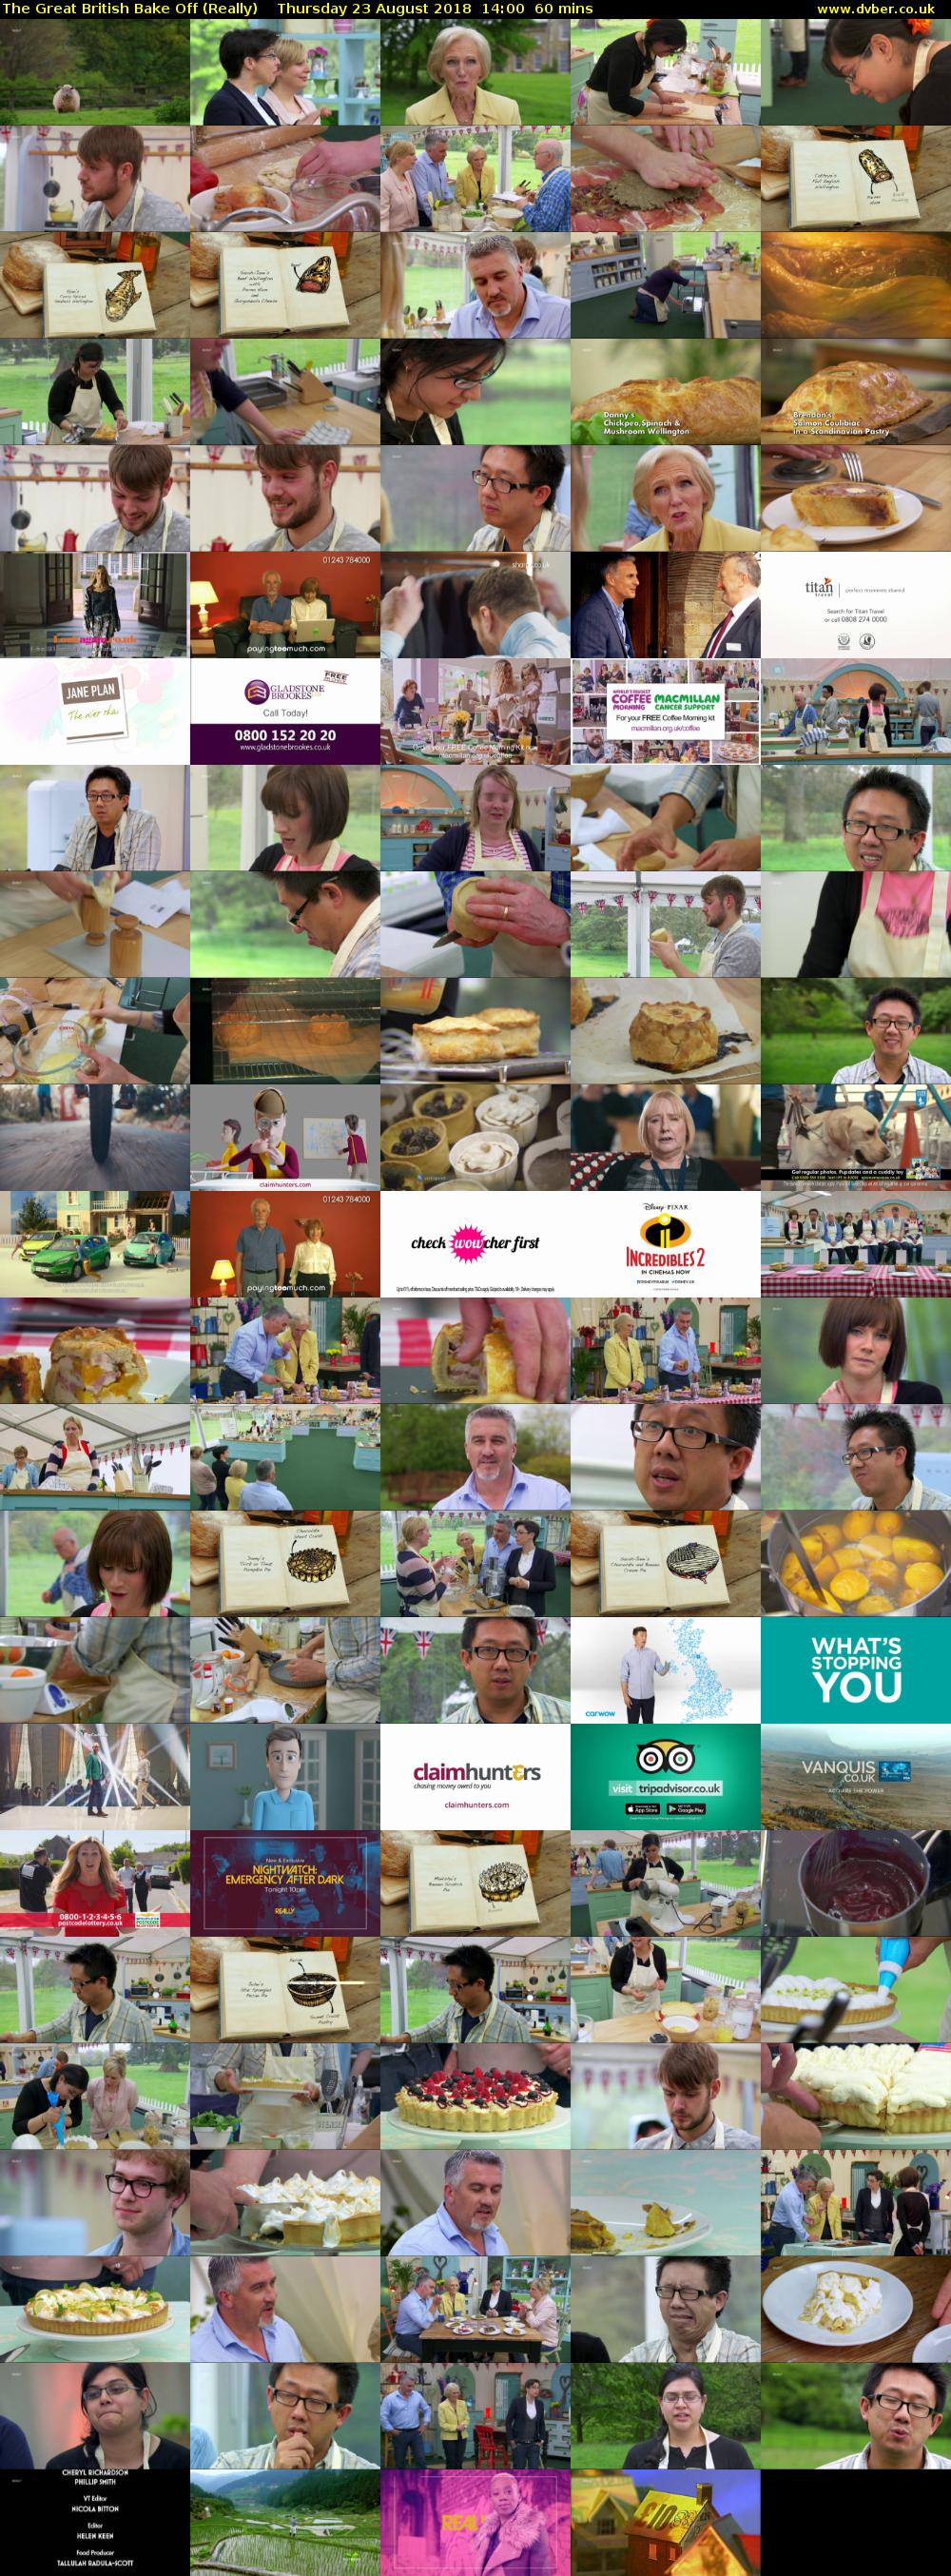 The Great British Bake Off (Really) Thursday 23 August 2018 14:00 - 15:00